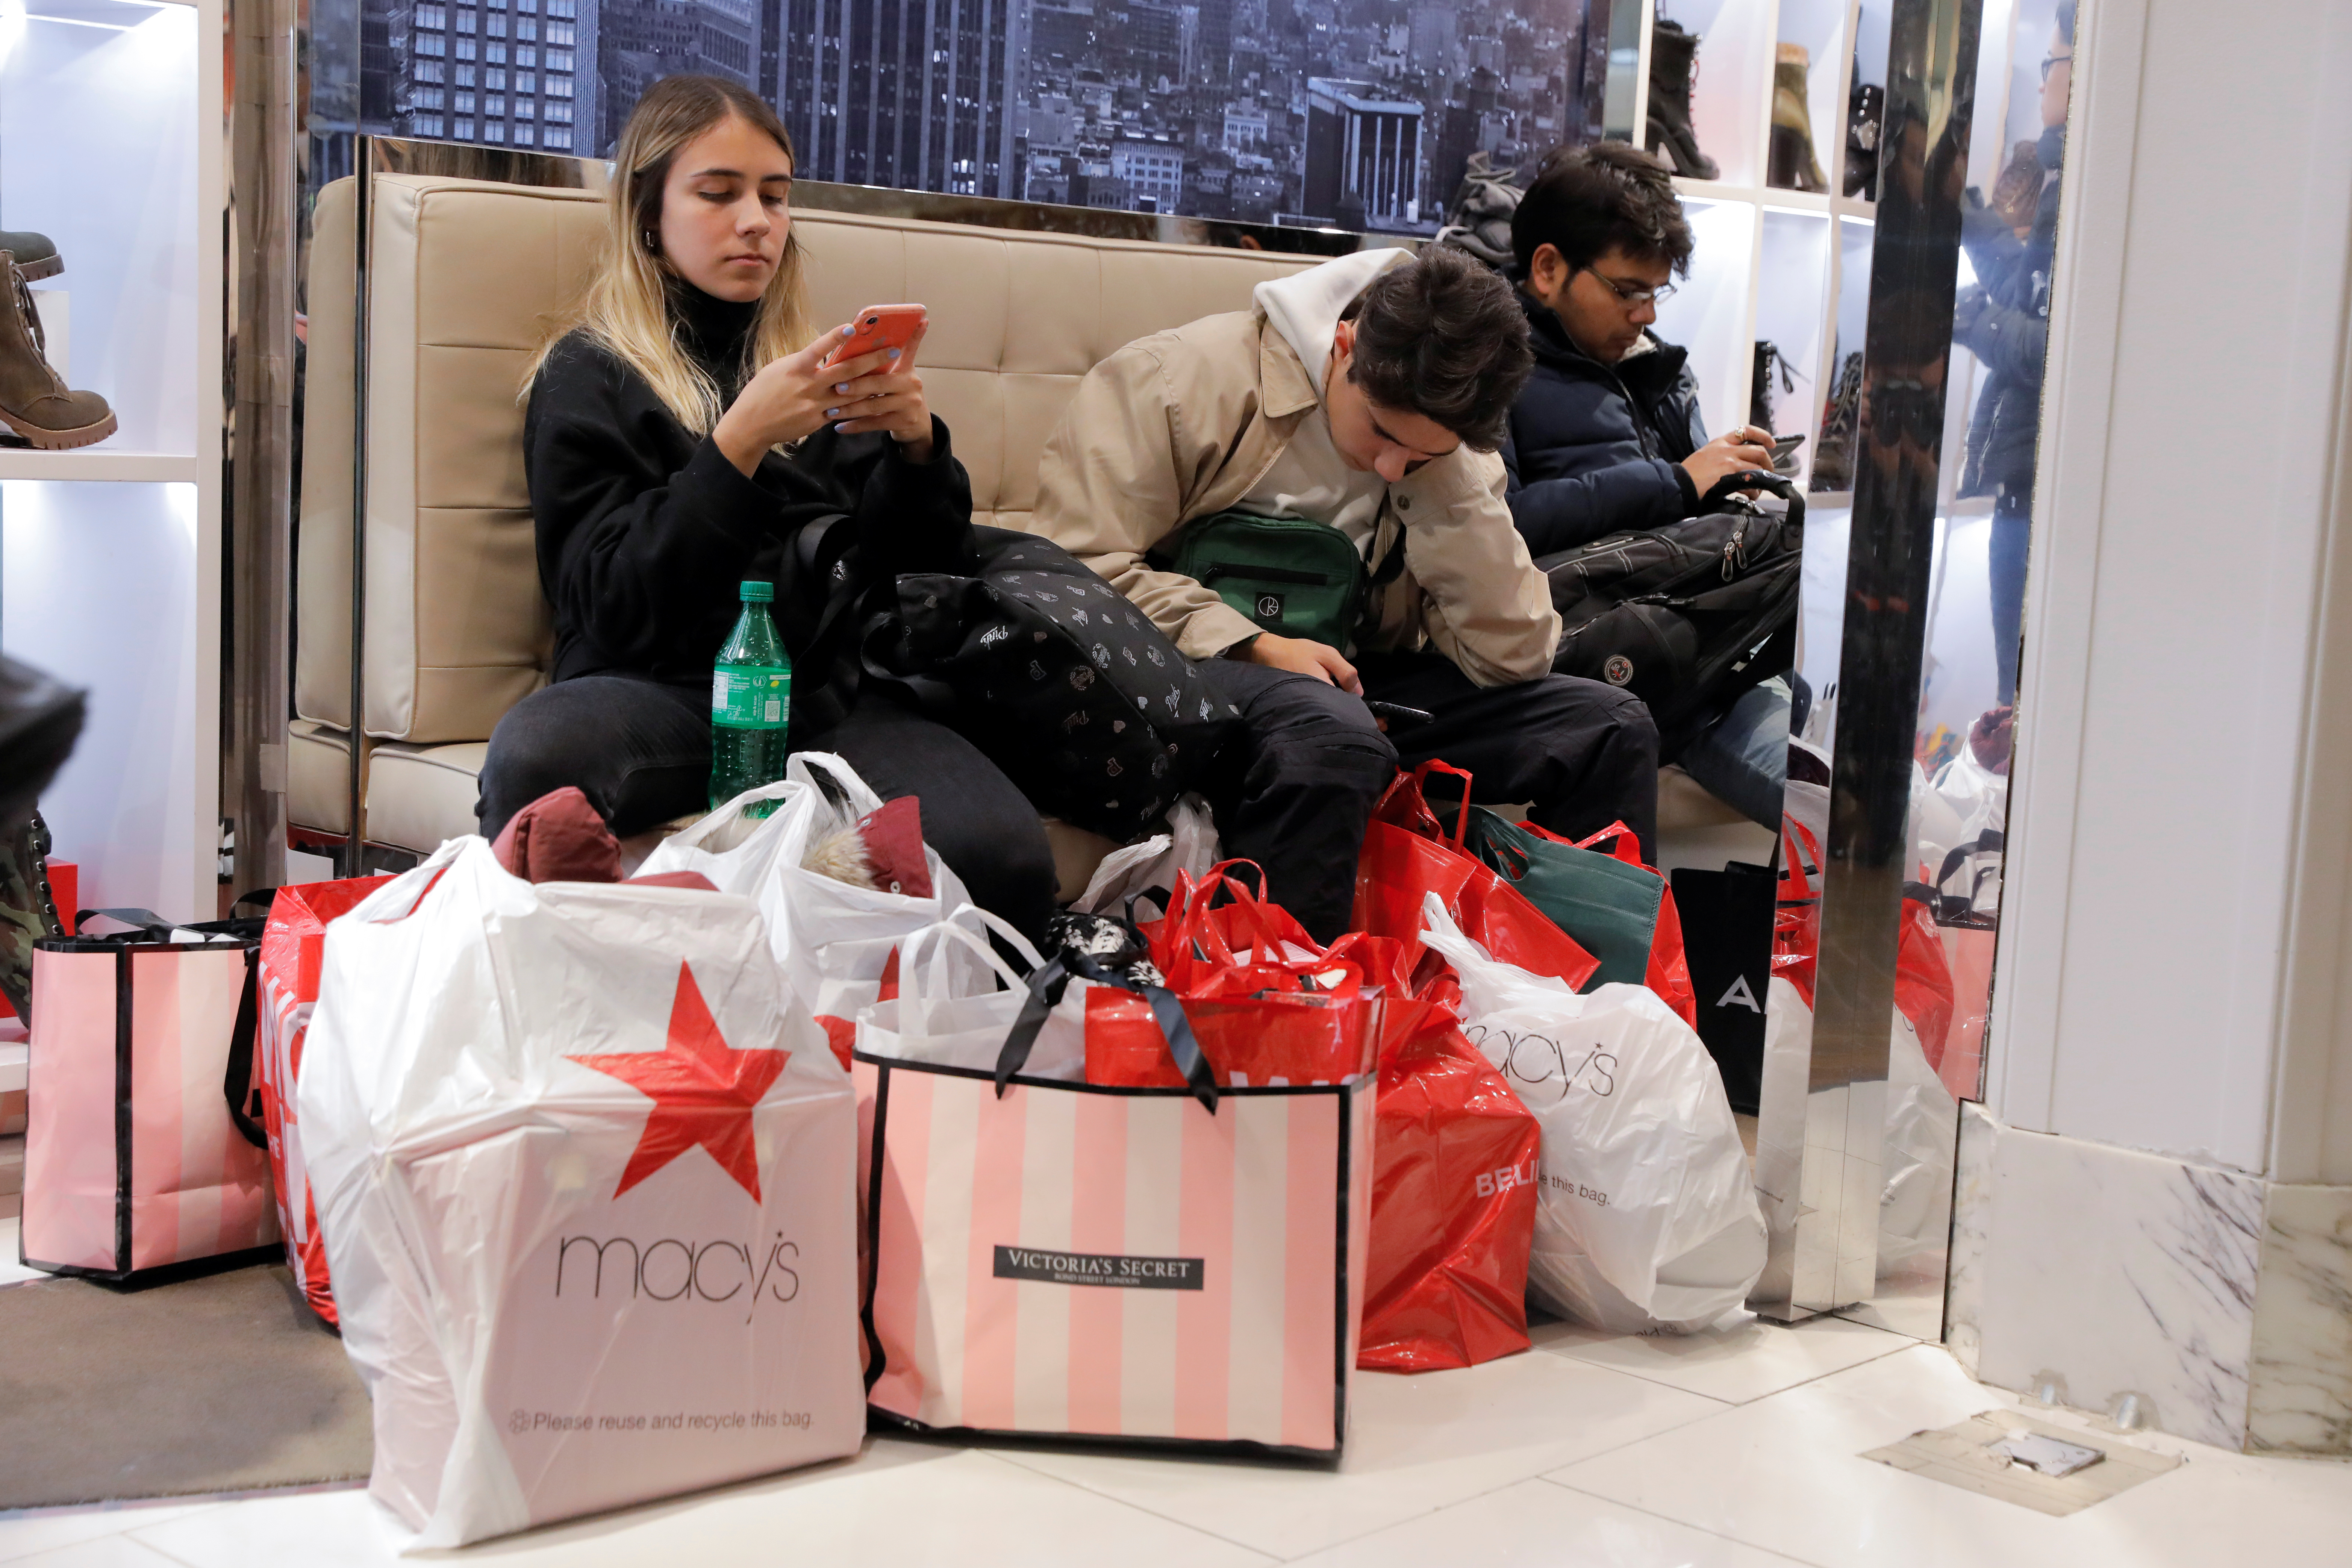 People rest with shopping bags at Macy's Herald Square during early opening for the Black Friday sales in Manhattan, New York City